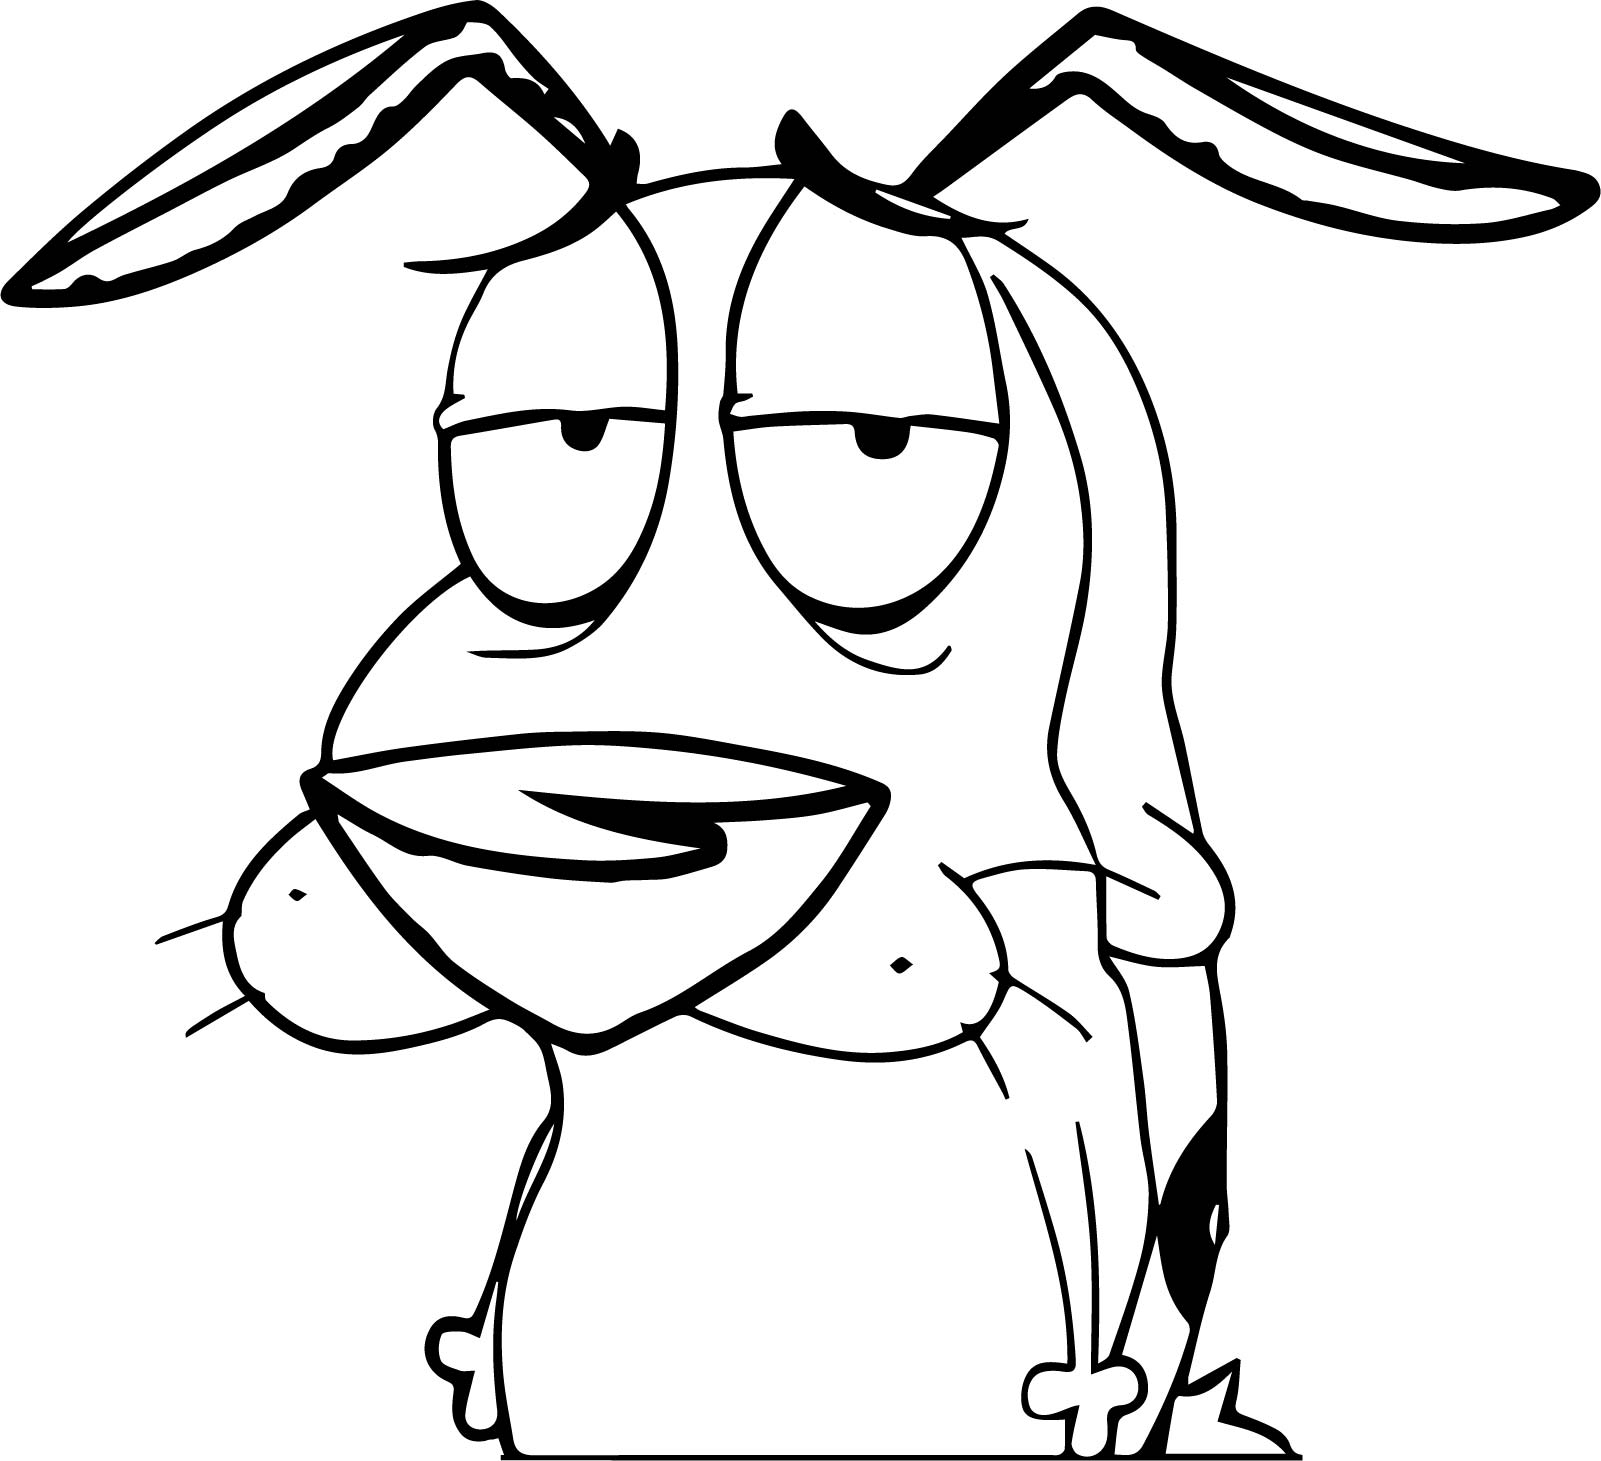 Courage The Cowardly Dog Coloring Page - Free Printable Coloring Pages